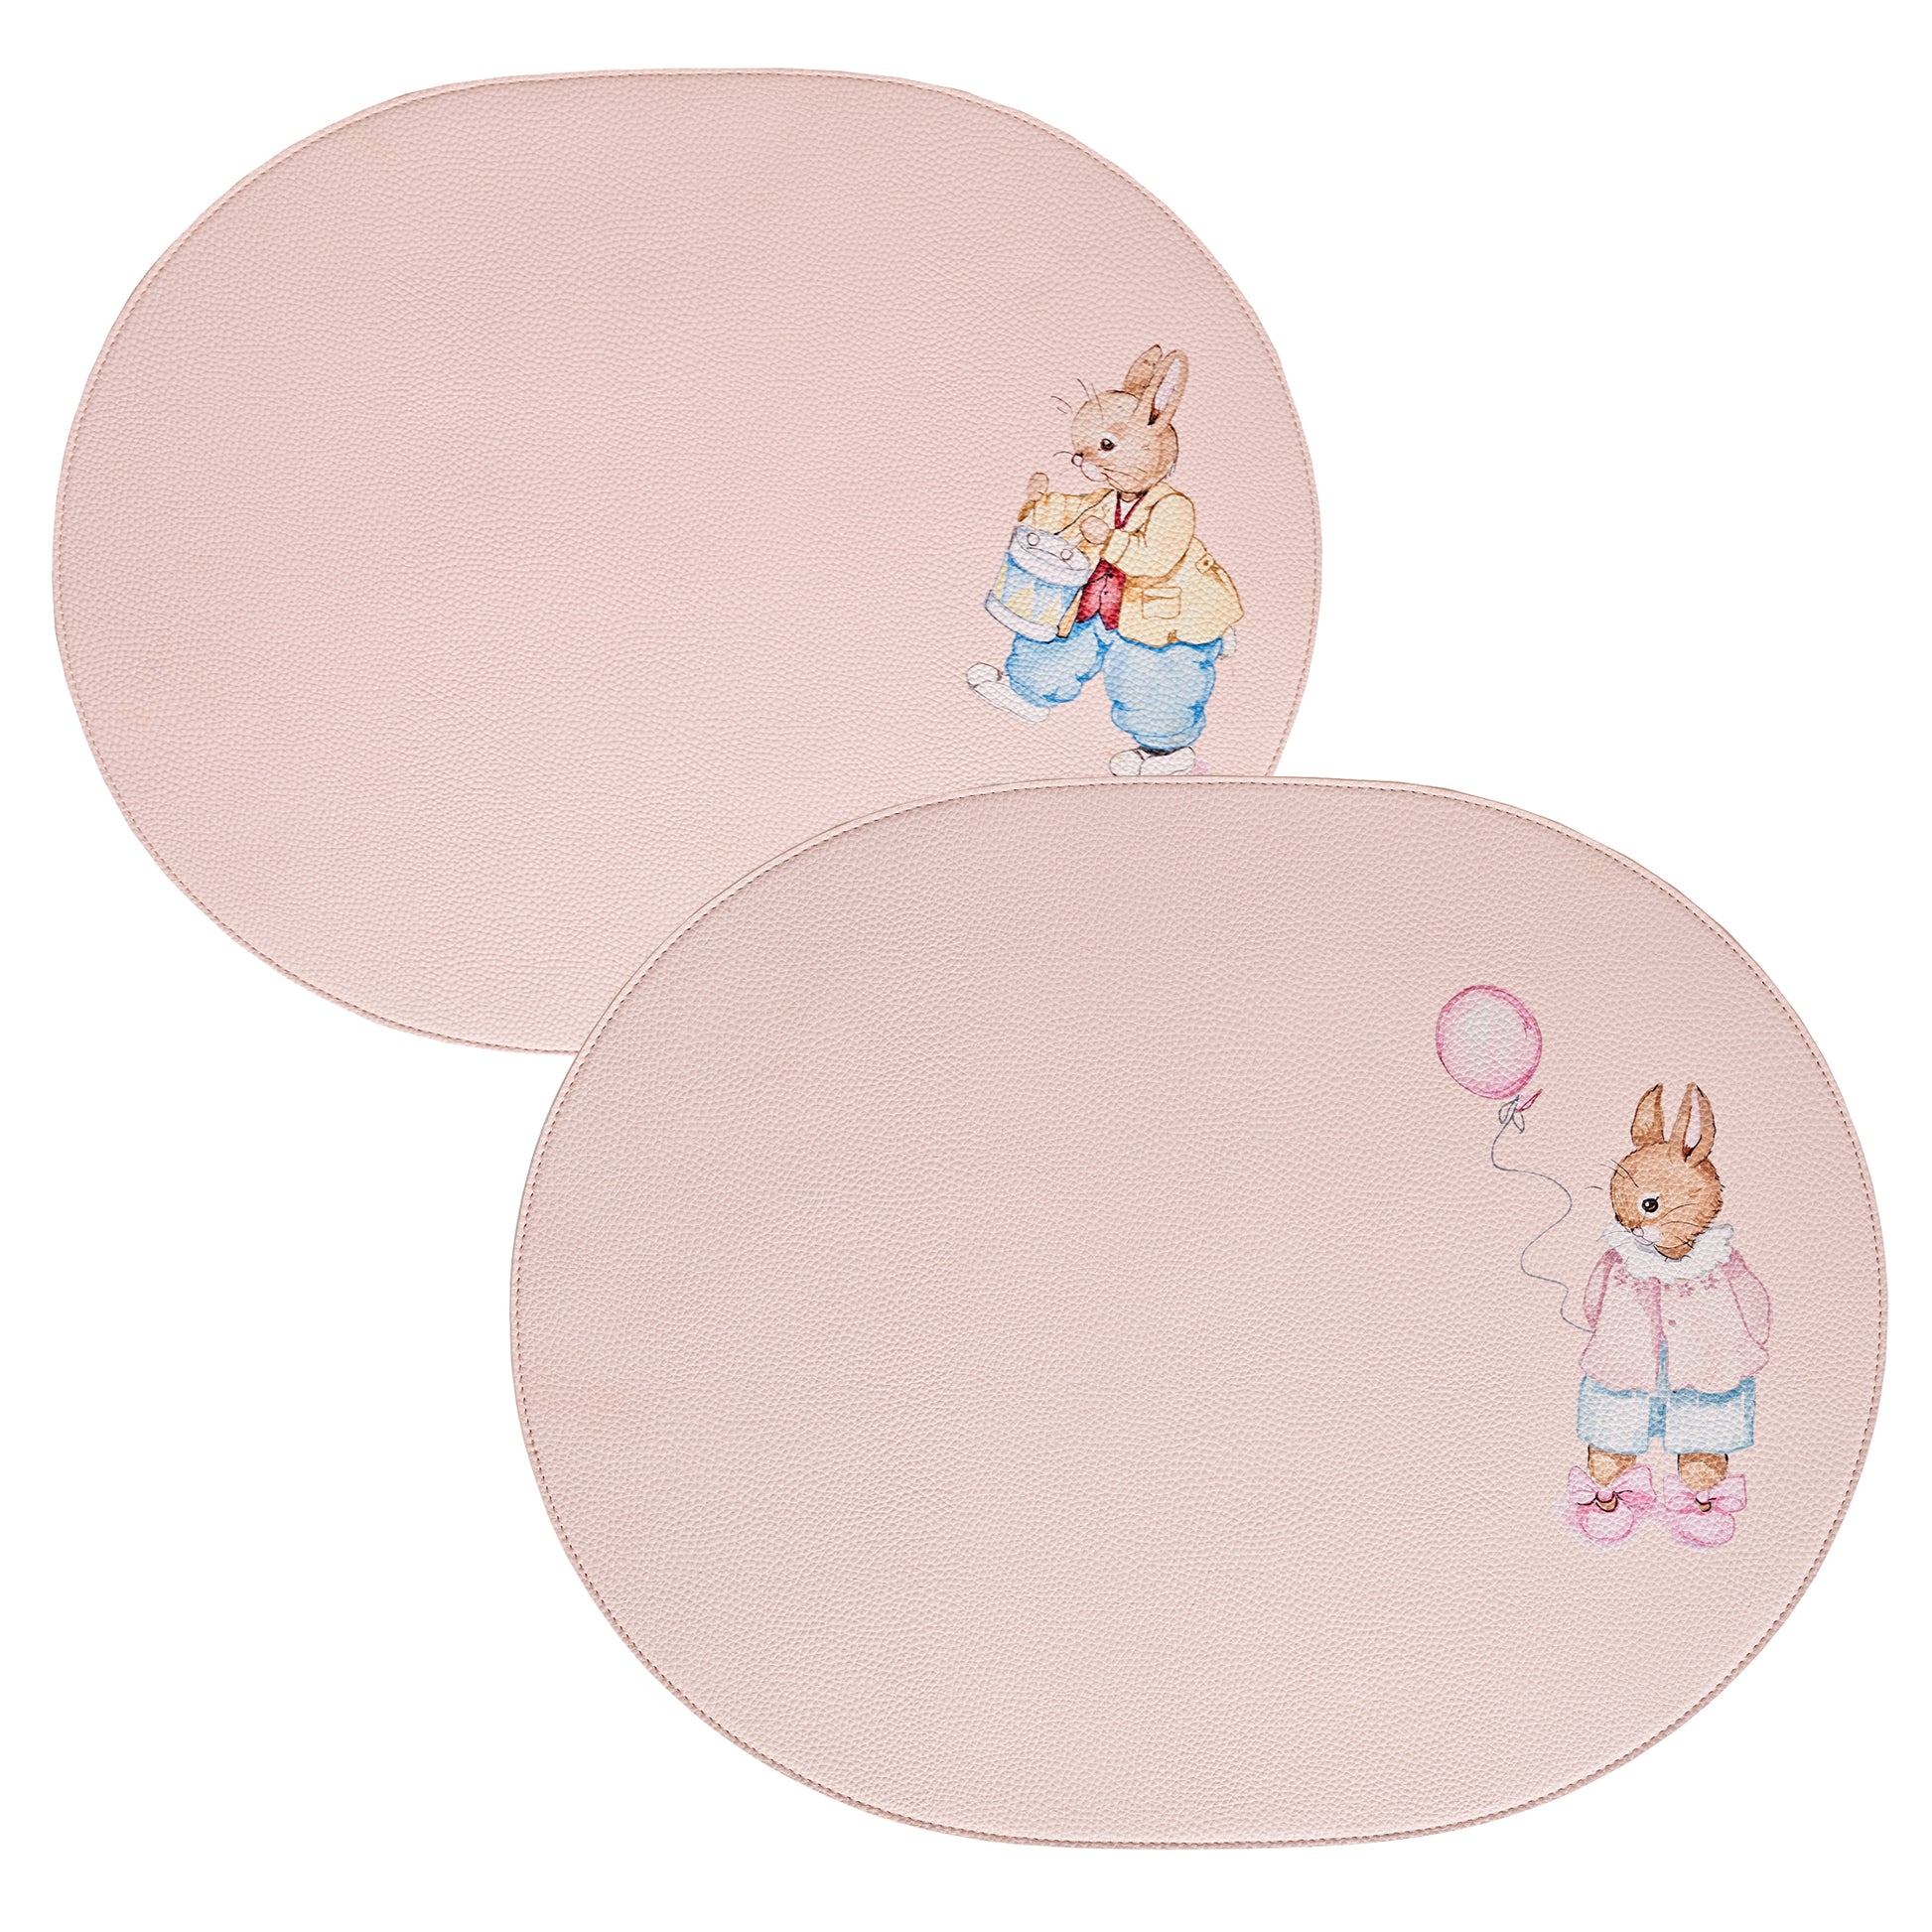 Set of 2 Leather Placemats - Designer Bunnies